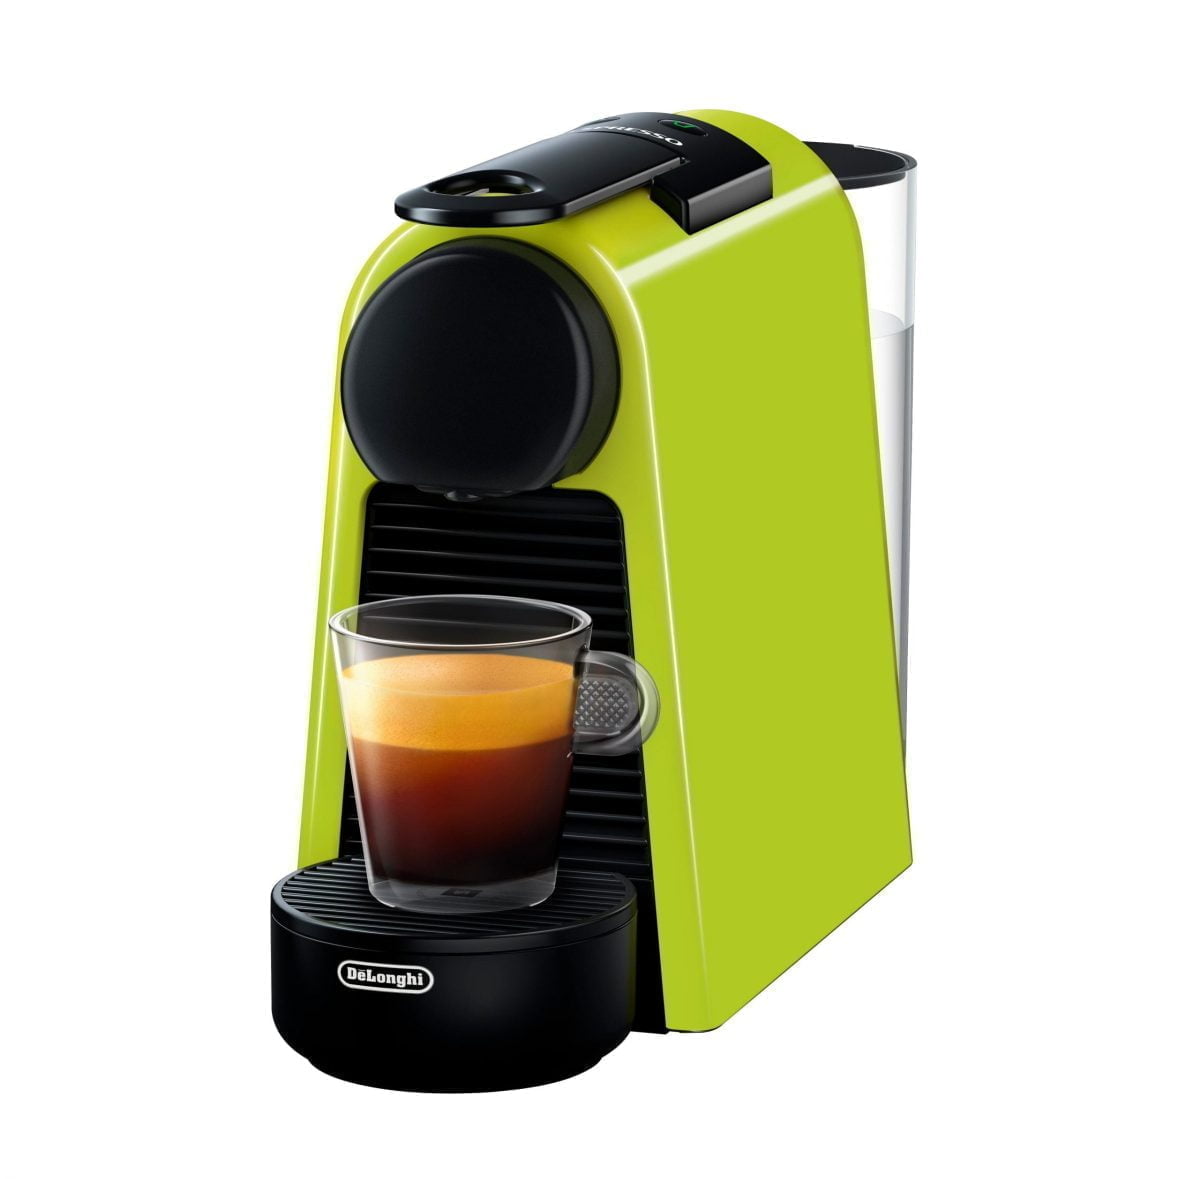 5934816 Sd Scaled Nespresso &Amp;Lt;Div Class=&Amp;Quot;Sku-Title&Amp;Quot;&Amp;Gt; &Amp;Lt;H1&Amp;Gt;Nespresso Essenza Mini Espresso Machine By De'Longhi, Lime Green - En85.L (14 Capsules Included)&Amp;Lt;/H1&Amp;Gt; &Amp;Lt;/Div&Amp;Gt; Compact Without Compromise By Concentrating Its Coffee Knowhow And Expertise Into A Brand New Design. Nespresso Has Delivered Its Most Compact Machine Yet - Without Any Compromise On Taste. The New Essenza Mini Combines Ease-Of-Use, Minimalist Beauty And Unrivalled Quality To Create The Perfect Cup Every Time. It'S The Small Machine That Opens Up The Whole World Of Nespresso Coffee. &Amp;Lt;H4&Amp;Gt;Warranty : 1 Year (Shipping Not Included)&Amp;Lt;/H4&Amp;Gt; Nespresso Essenza Mini Nespresso Essenza Mini Espresso Machine By De'Longhi, Lime Green - En85.L (14 Capsules Included)